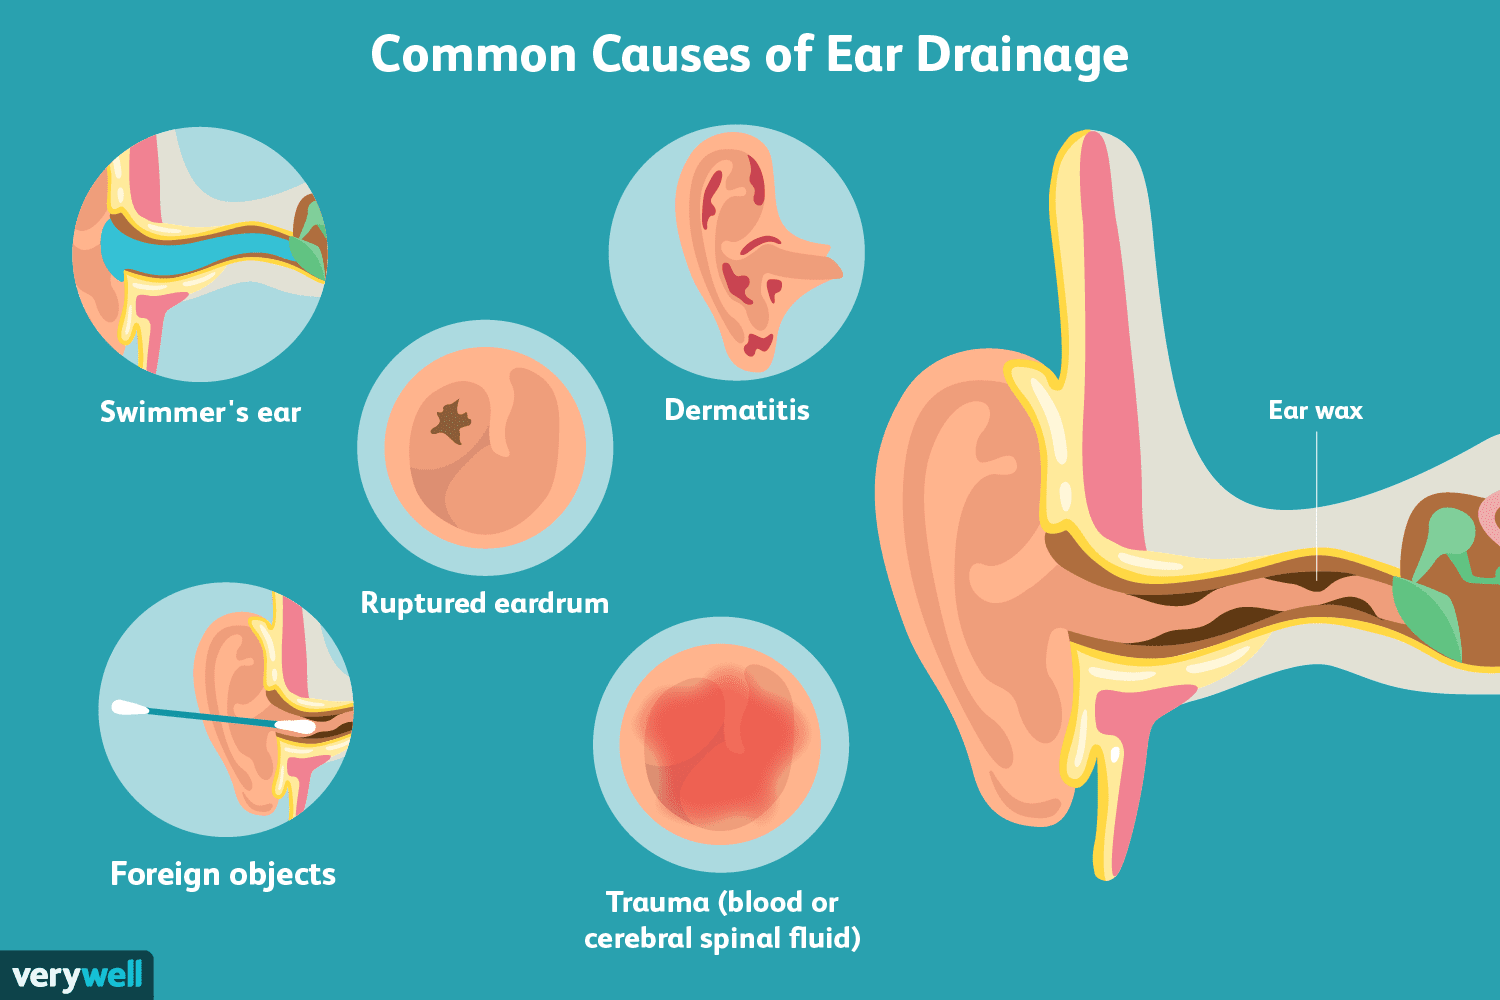 Ear pain/discharge